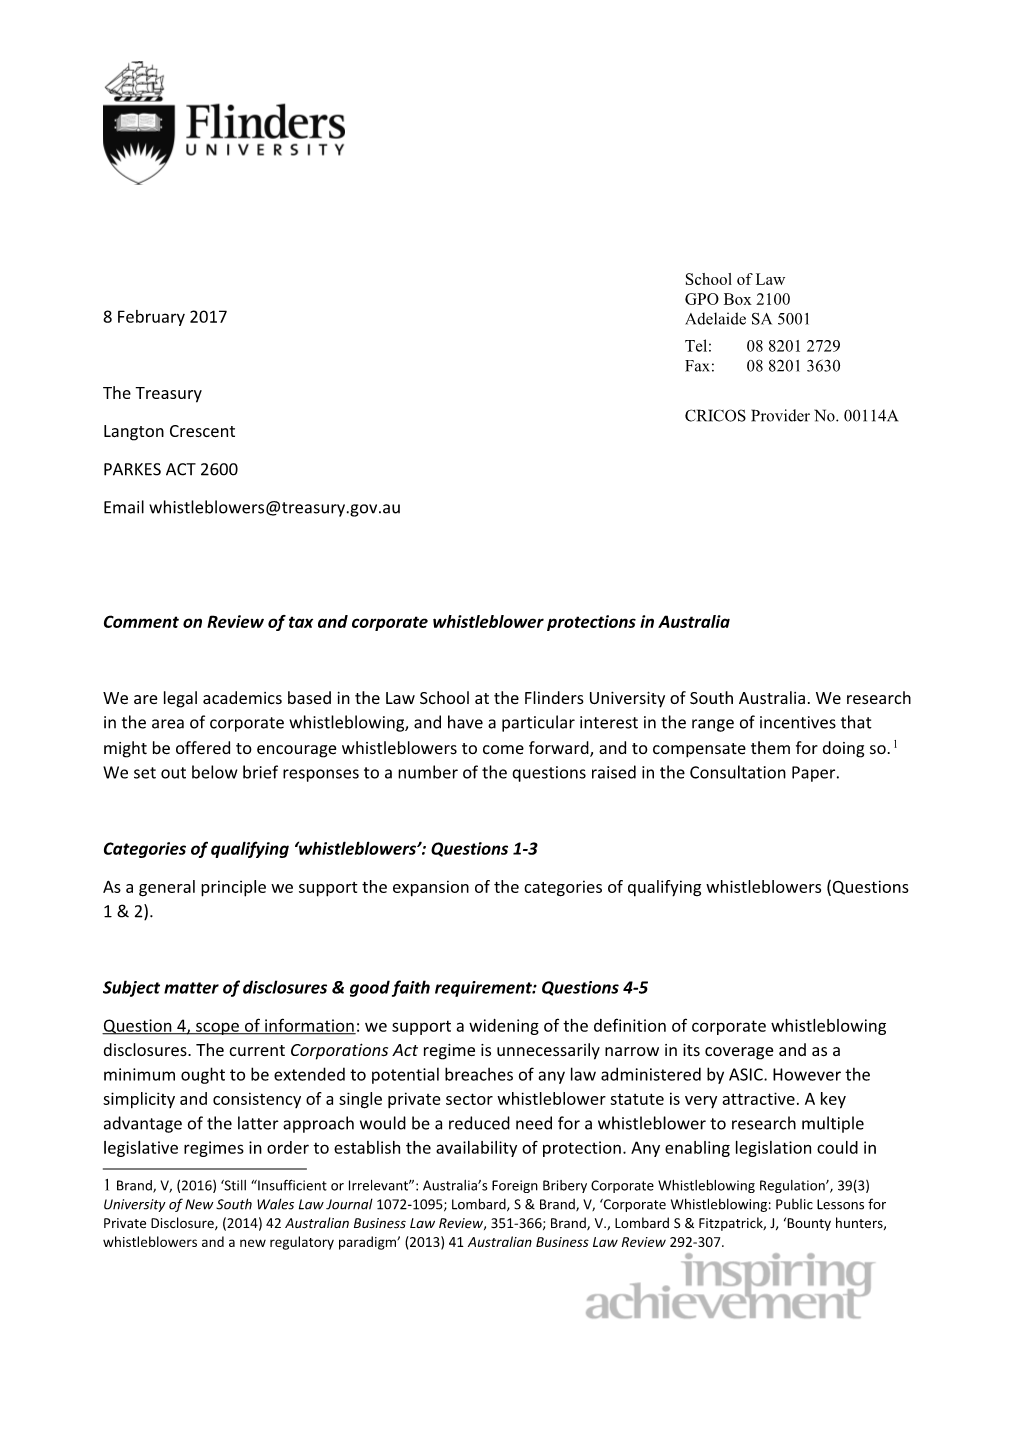 Flinders University School of Law - Submission in Response To: Review of Tax and Corporate